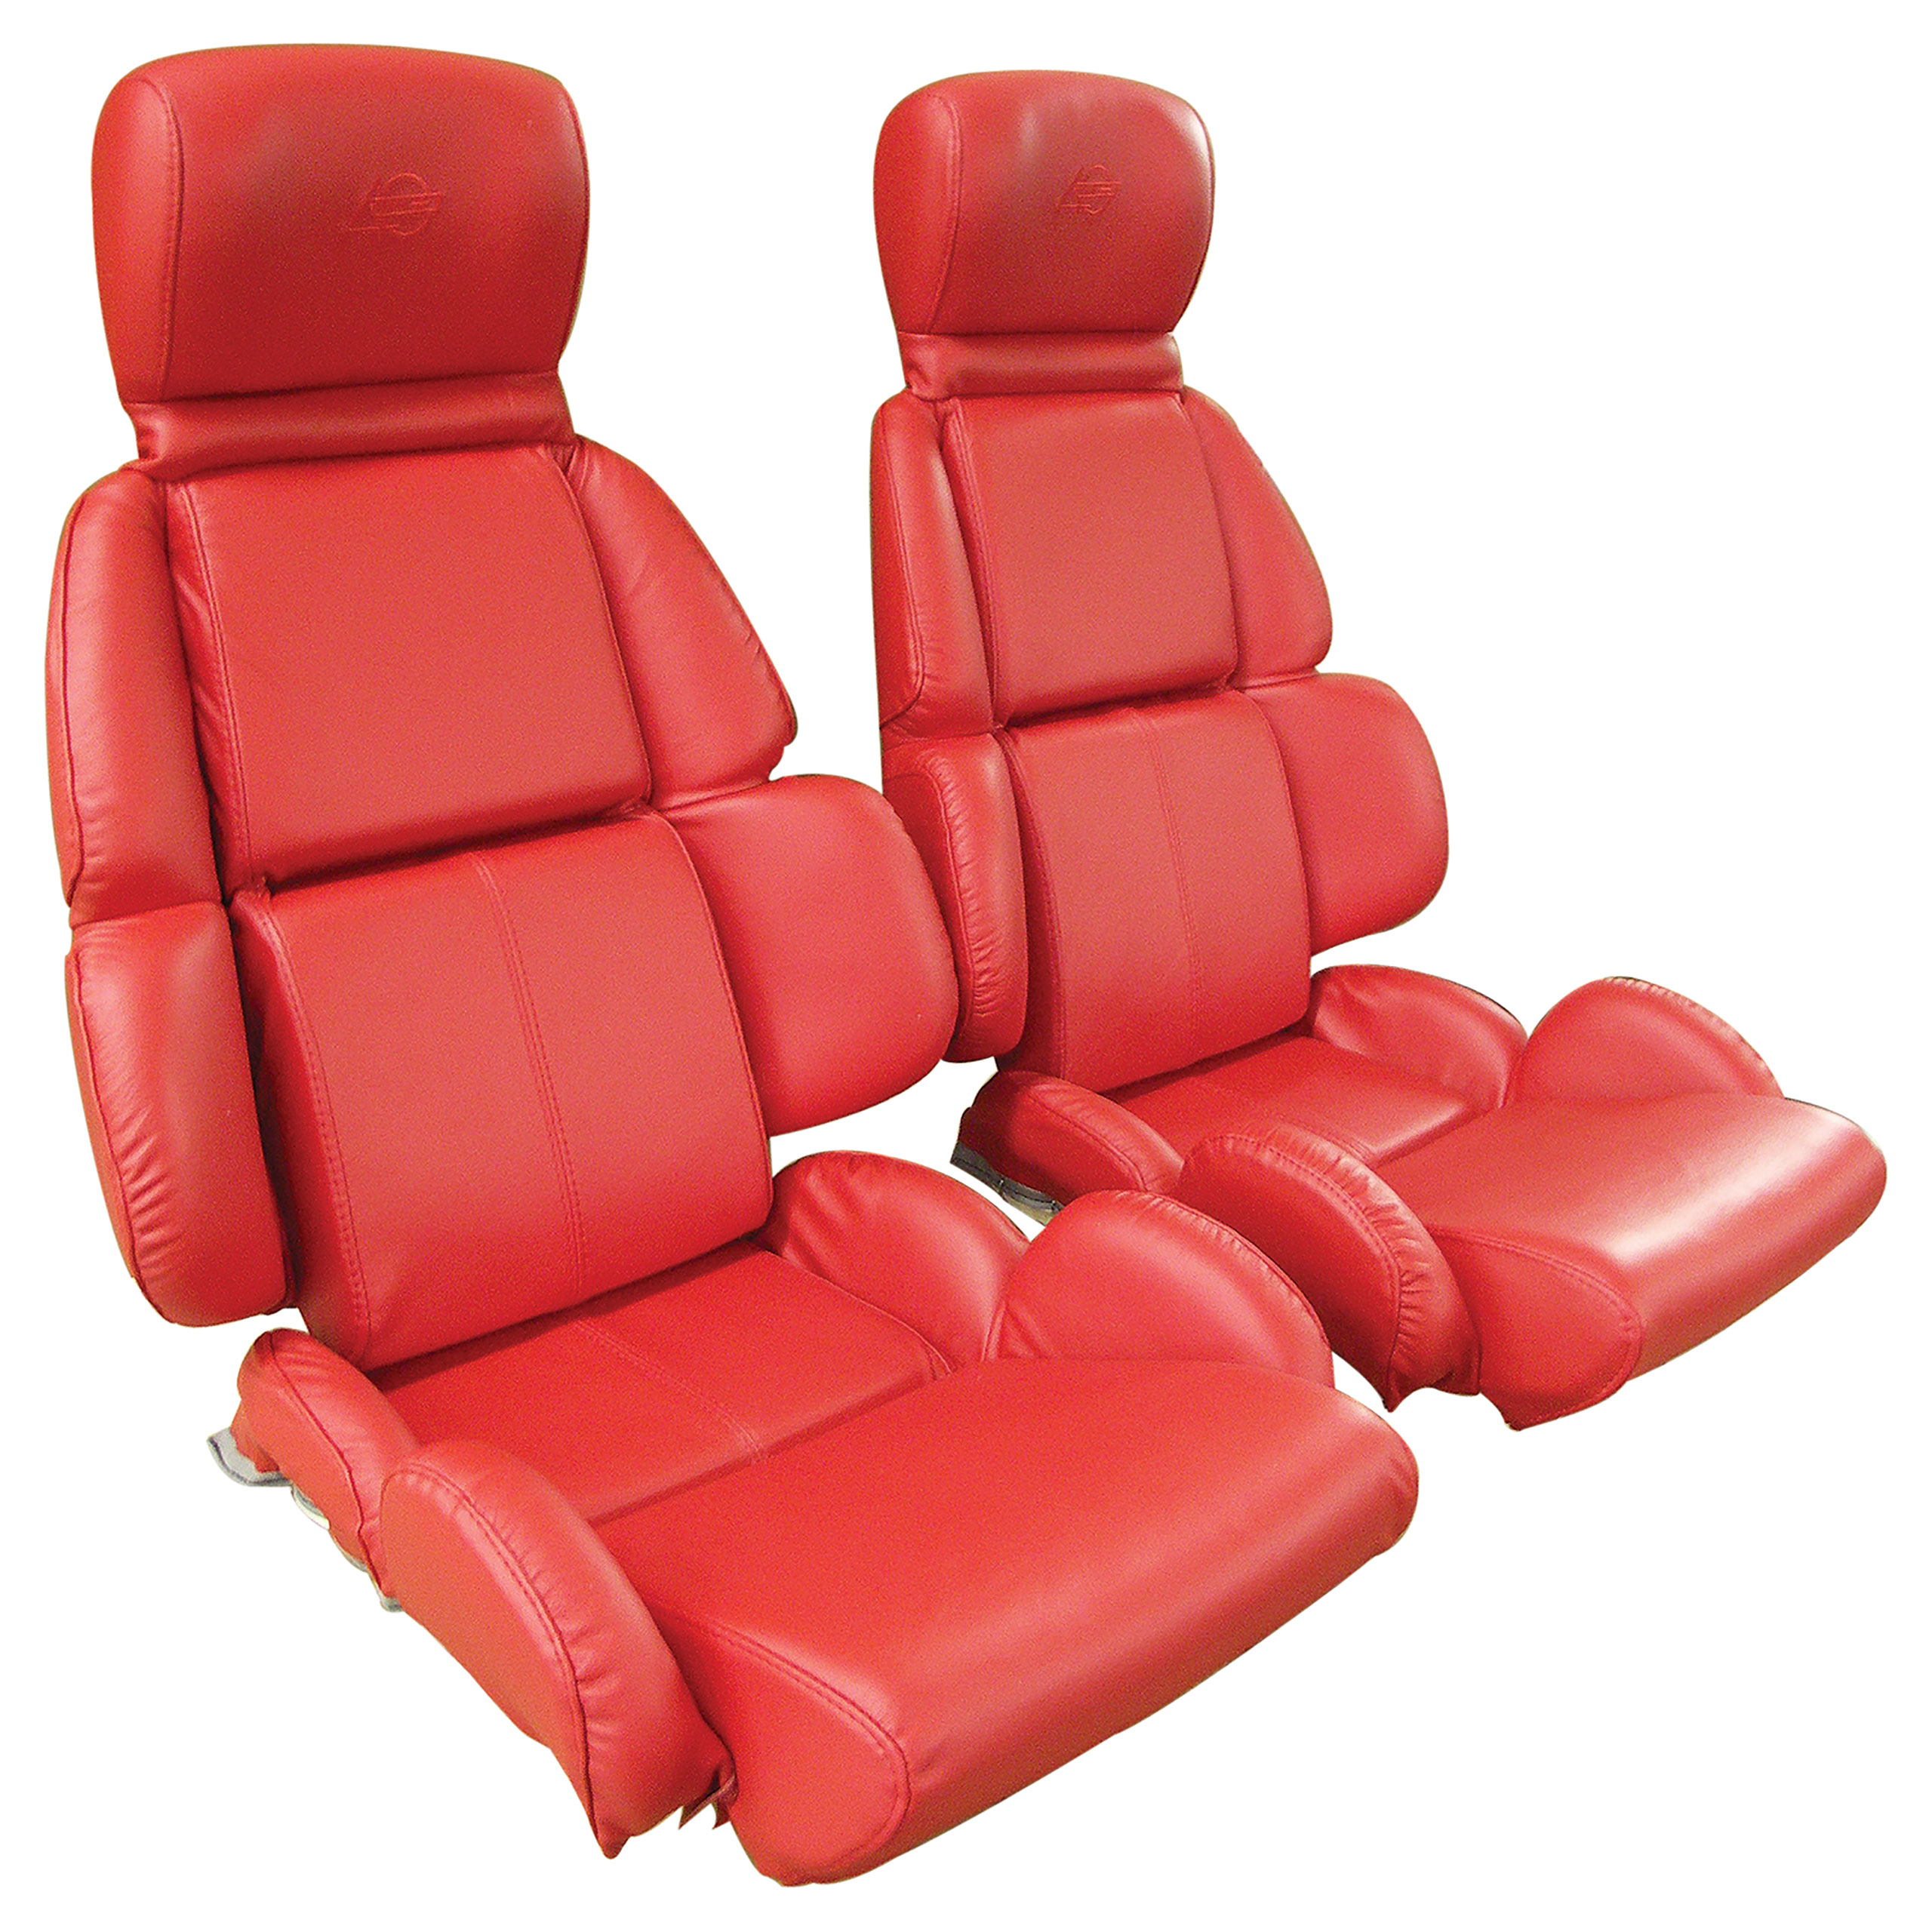 1993 Corvette C4 Mounted "Leather-Like" Vinyl Seat Covers Red Standard CA-448985